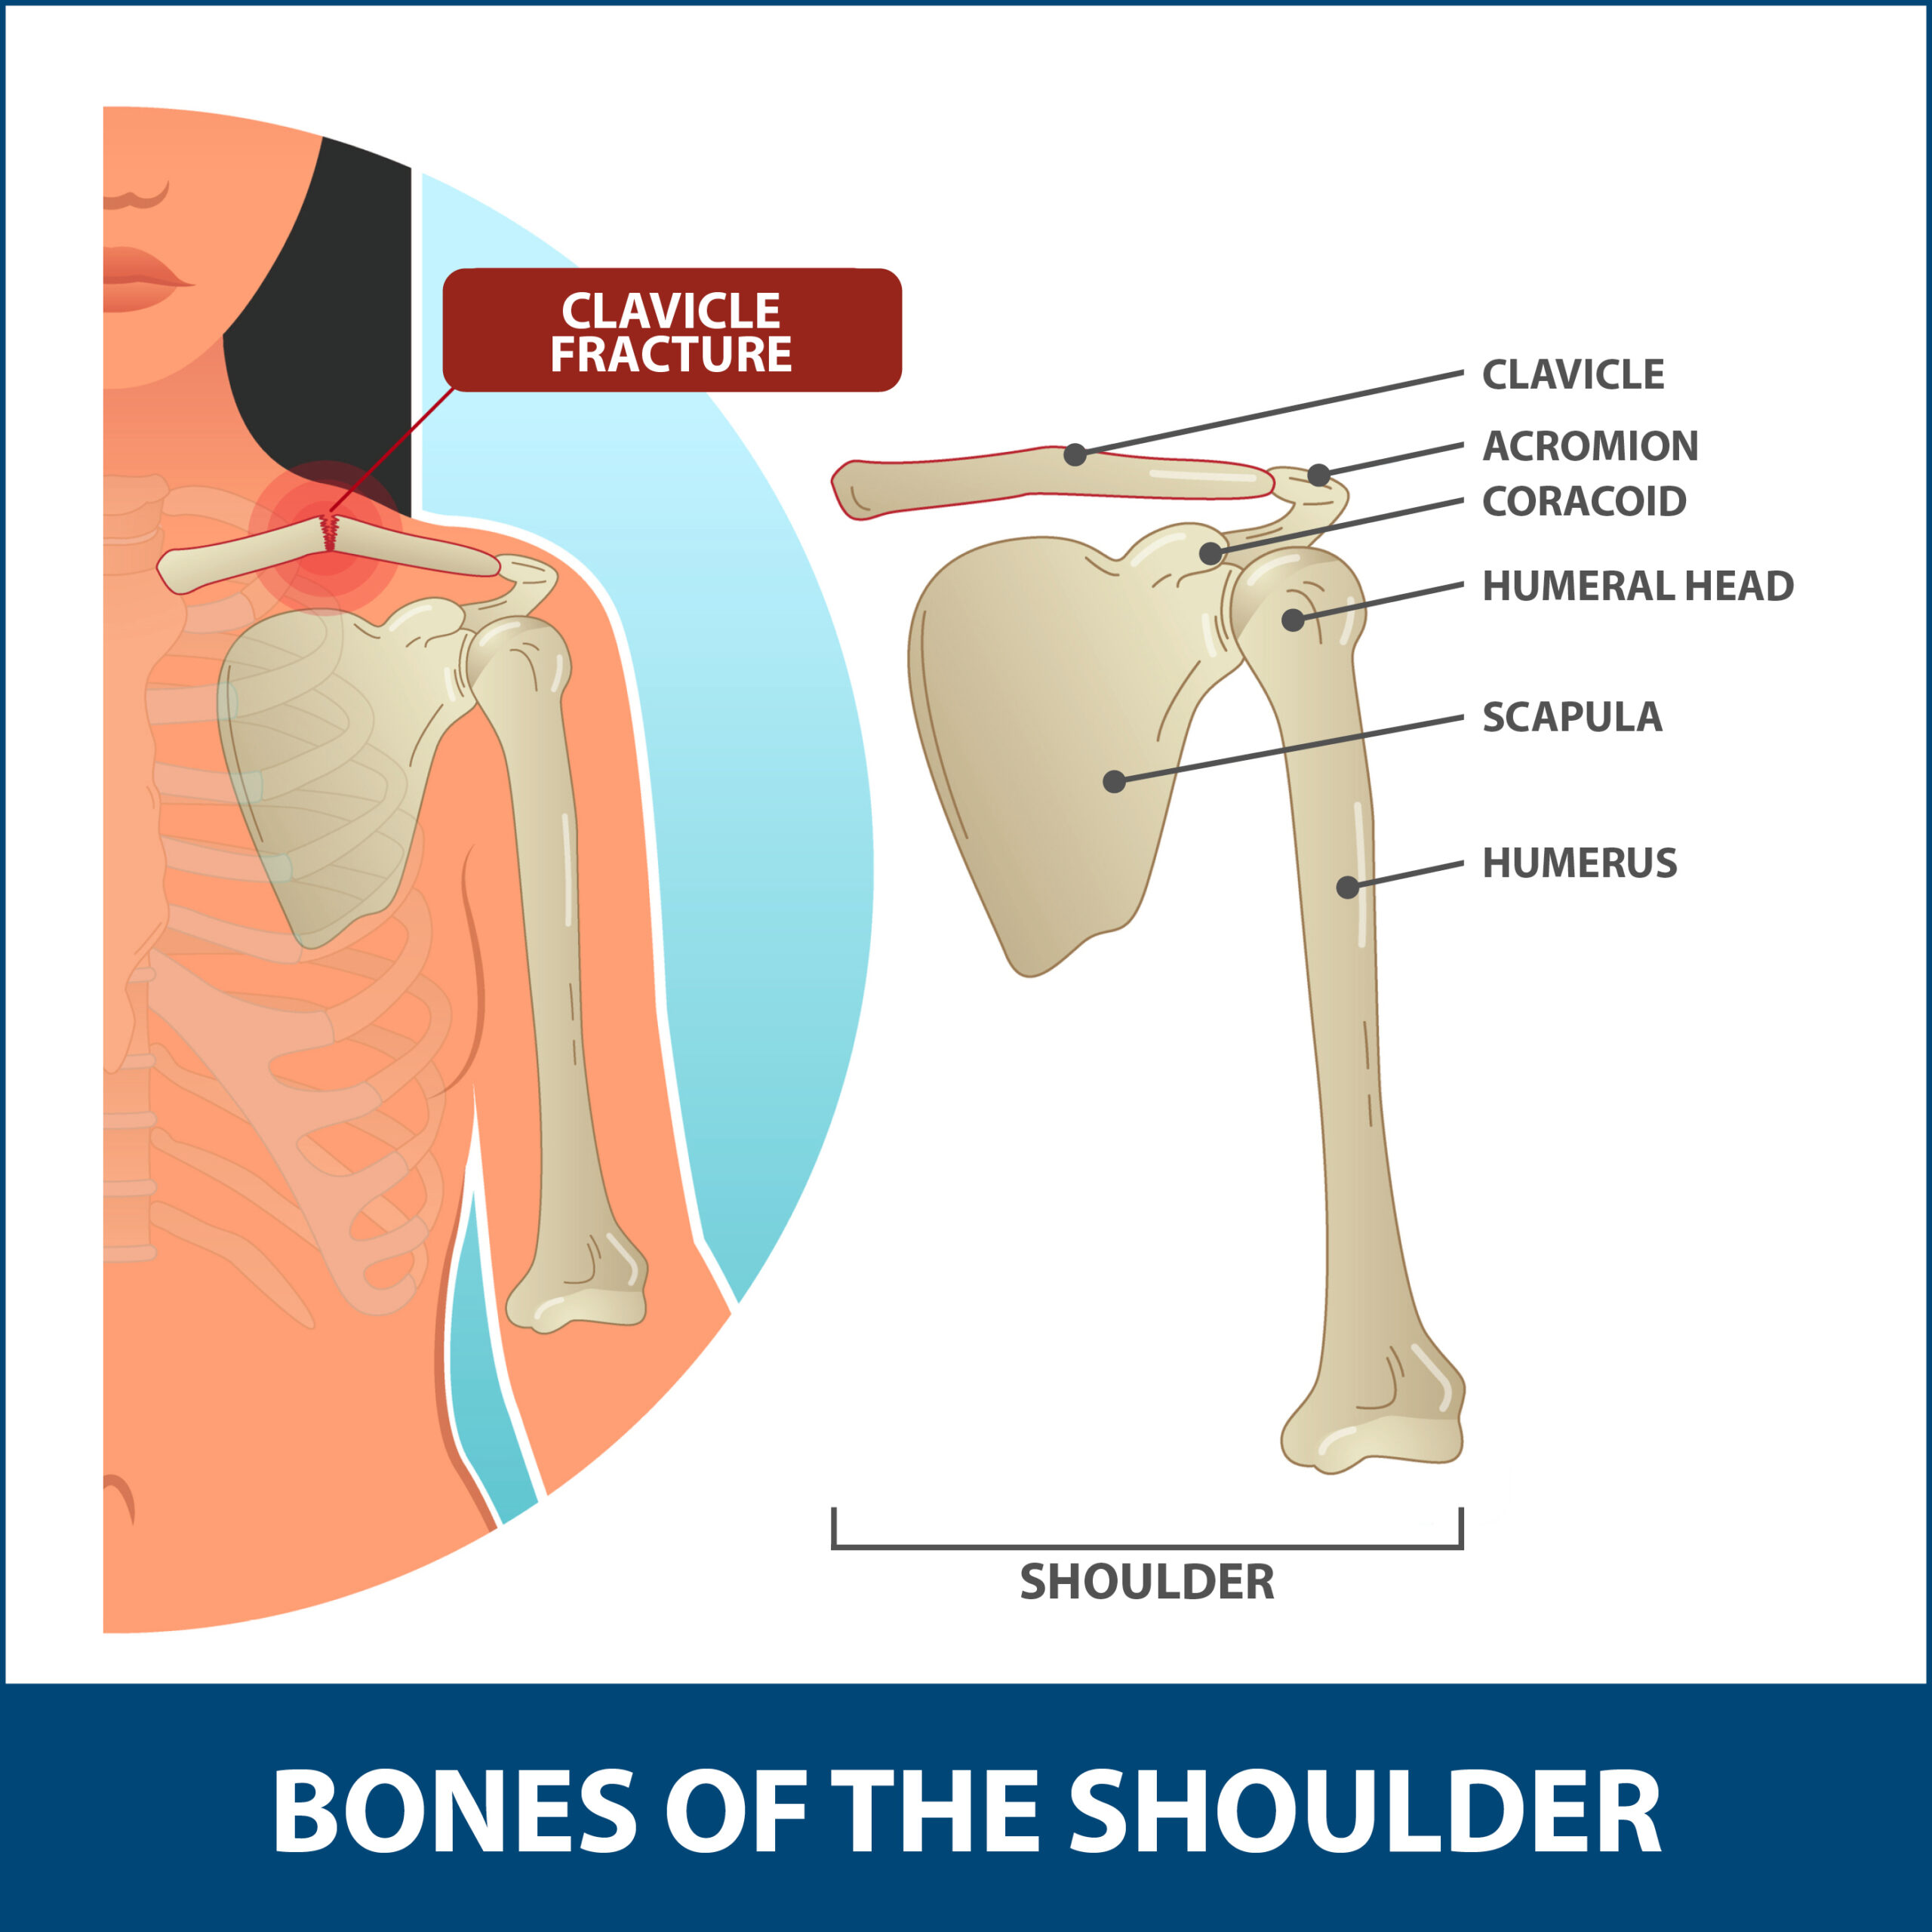 What nerve is injured in medial clavicle fracture?